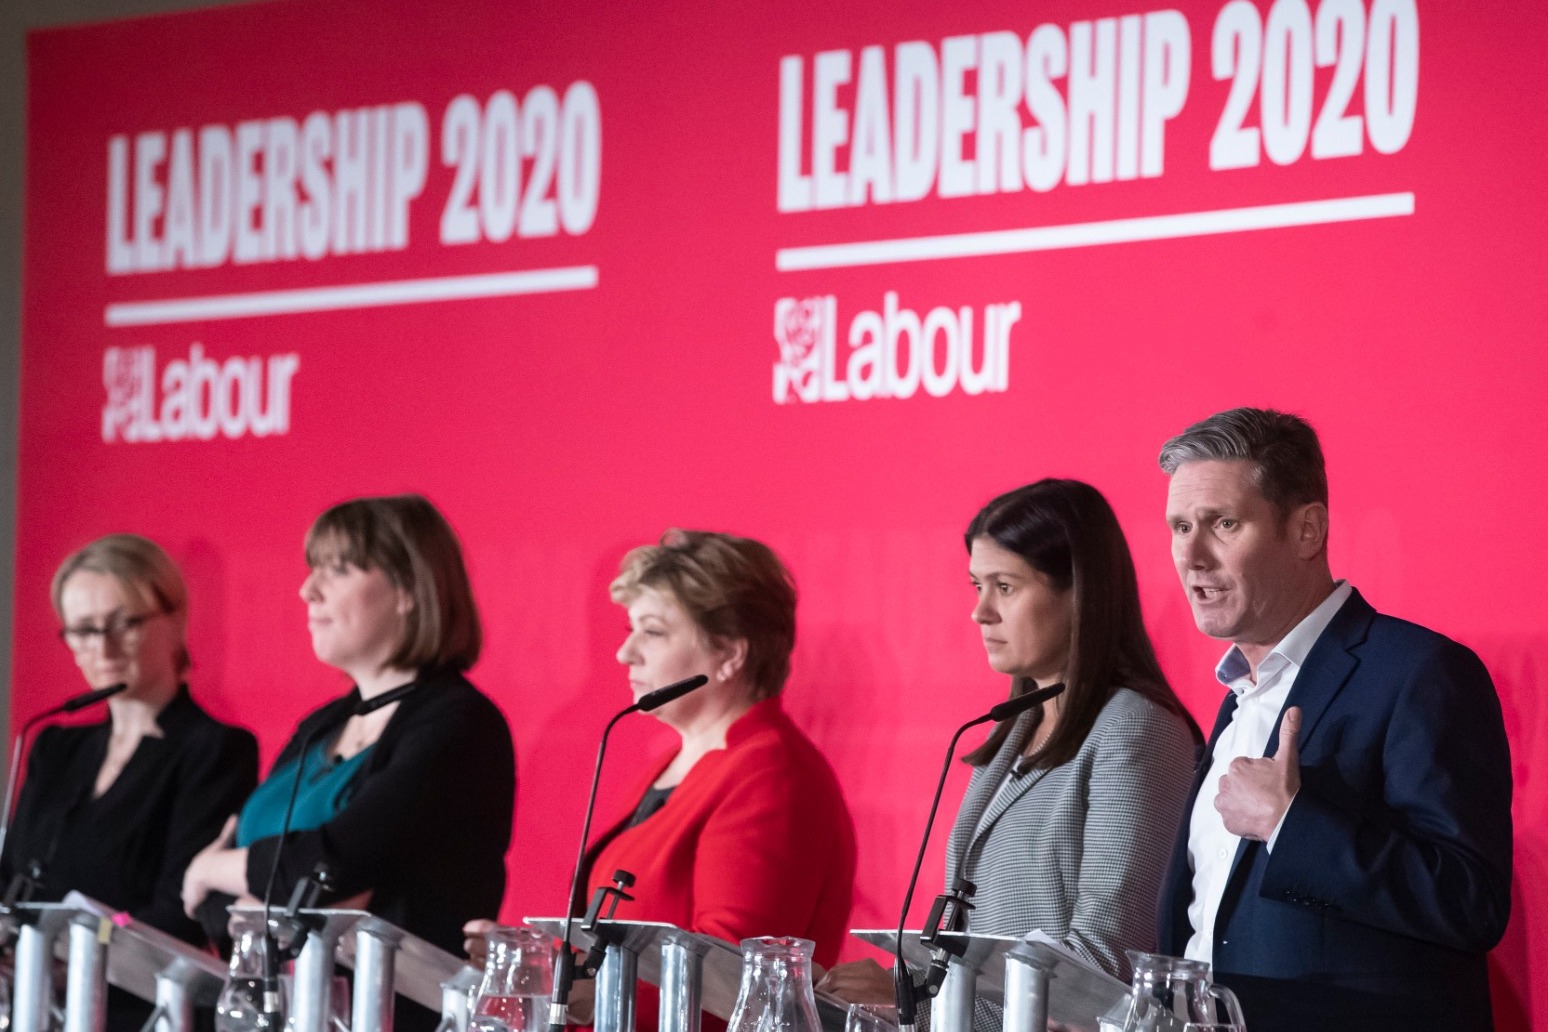 Labour debate brings calls for unity - and swipes. 